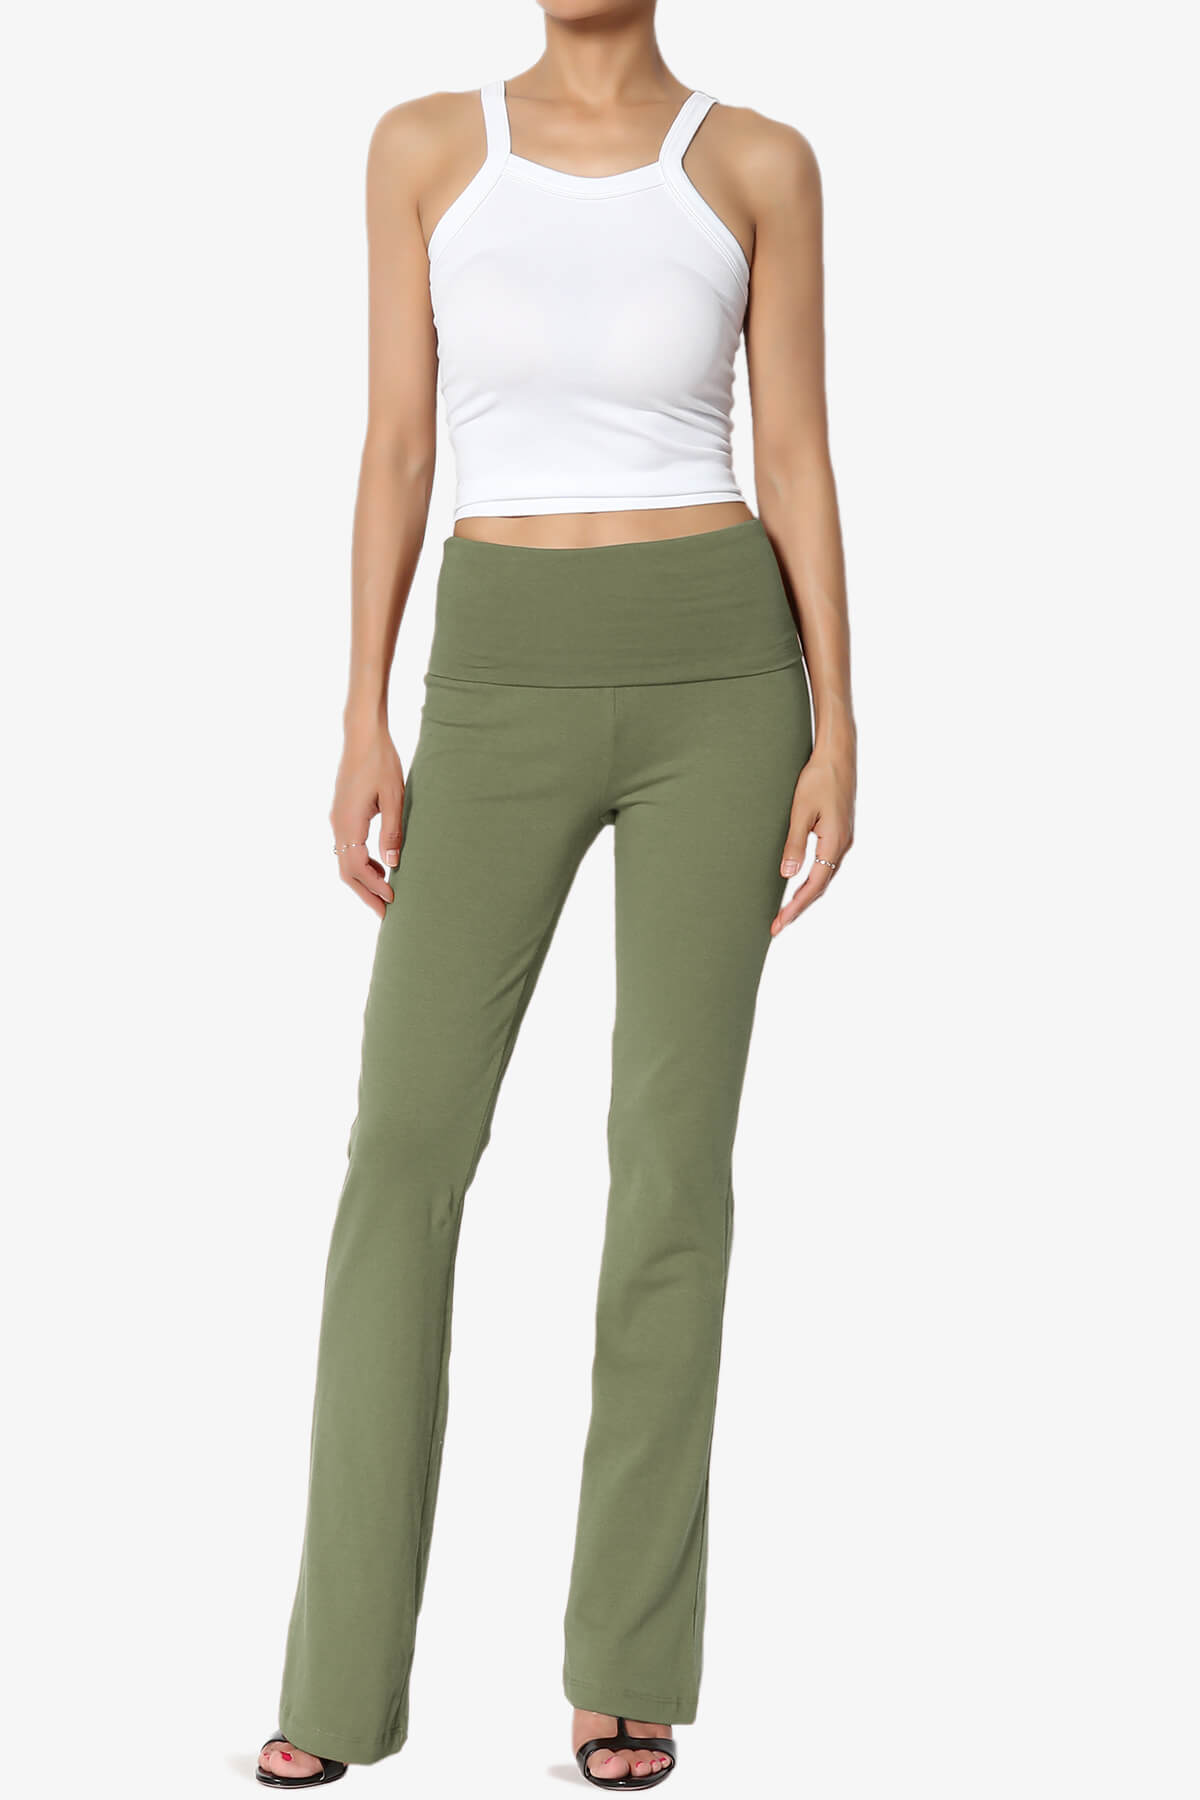 Load image into Gallery viewer, Sara Foldover Waist Yoga Pants DUSTY OLIVE_6
